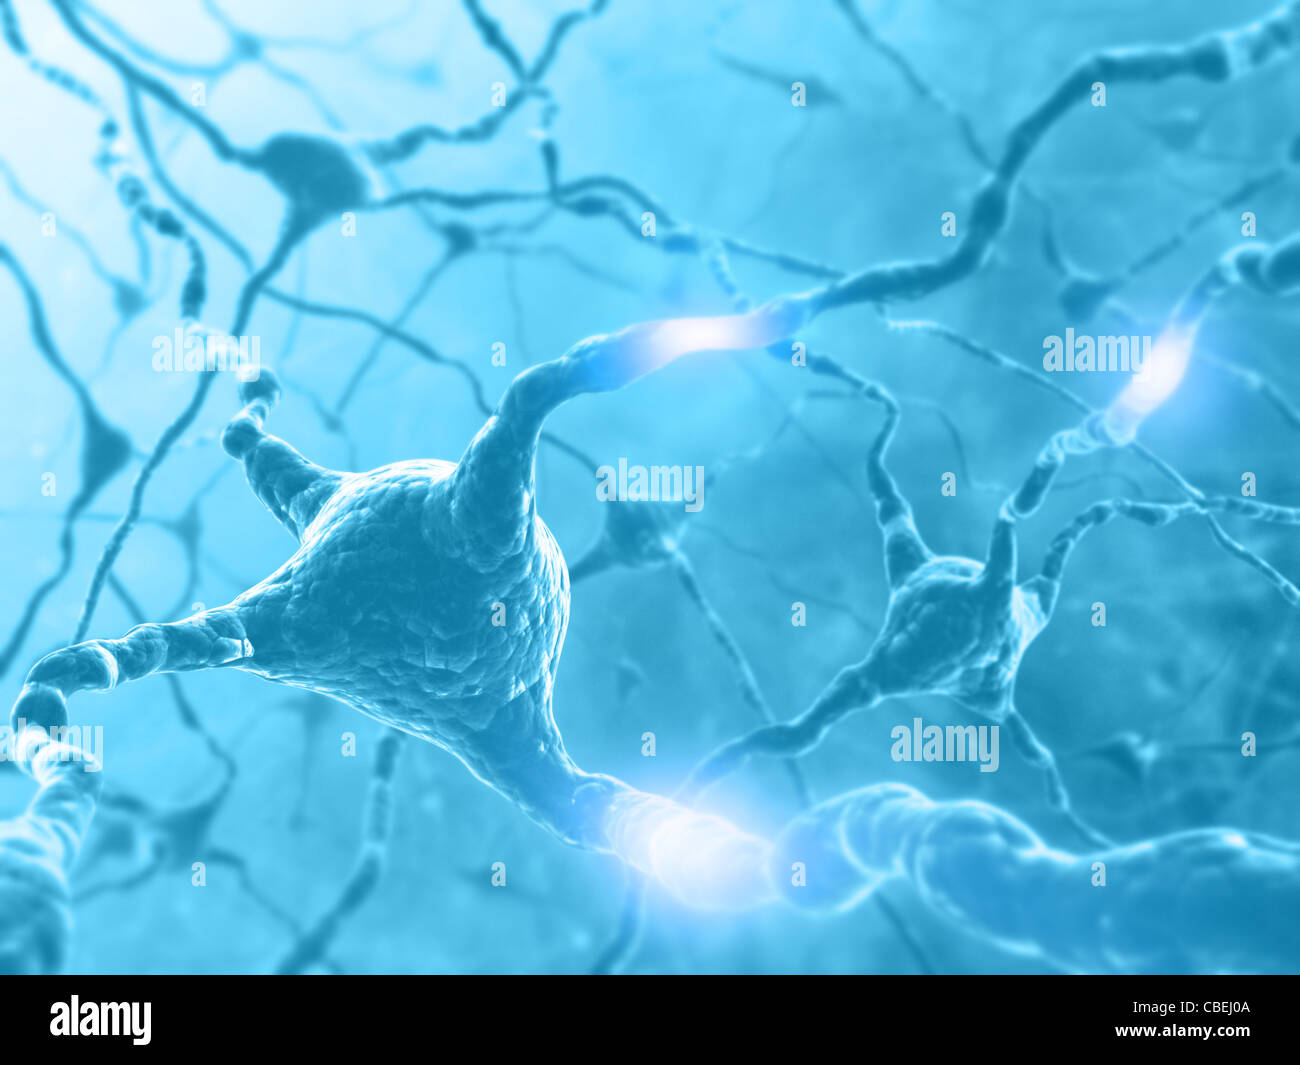 Inside the brain. Concept of neurons and nervous system. Two neurons transmitting information. Stock Photo